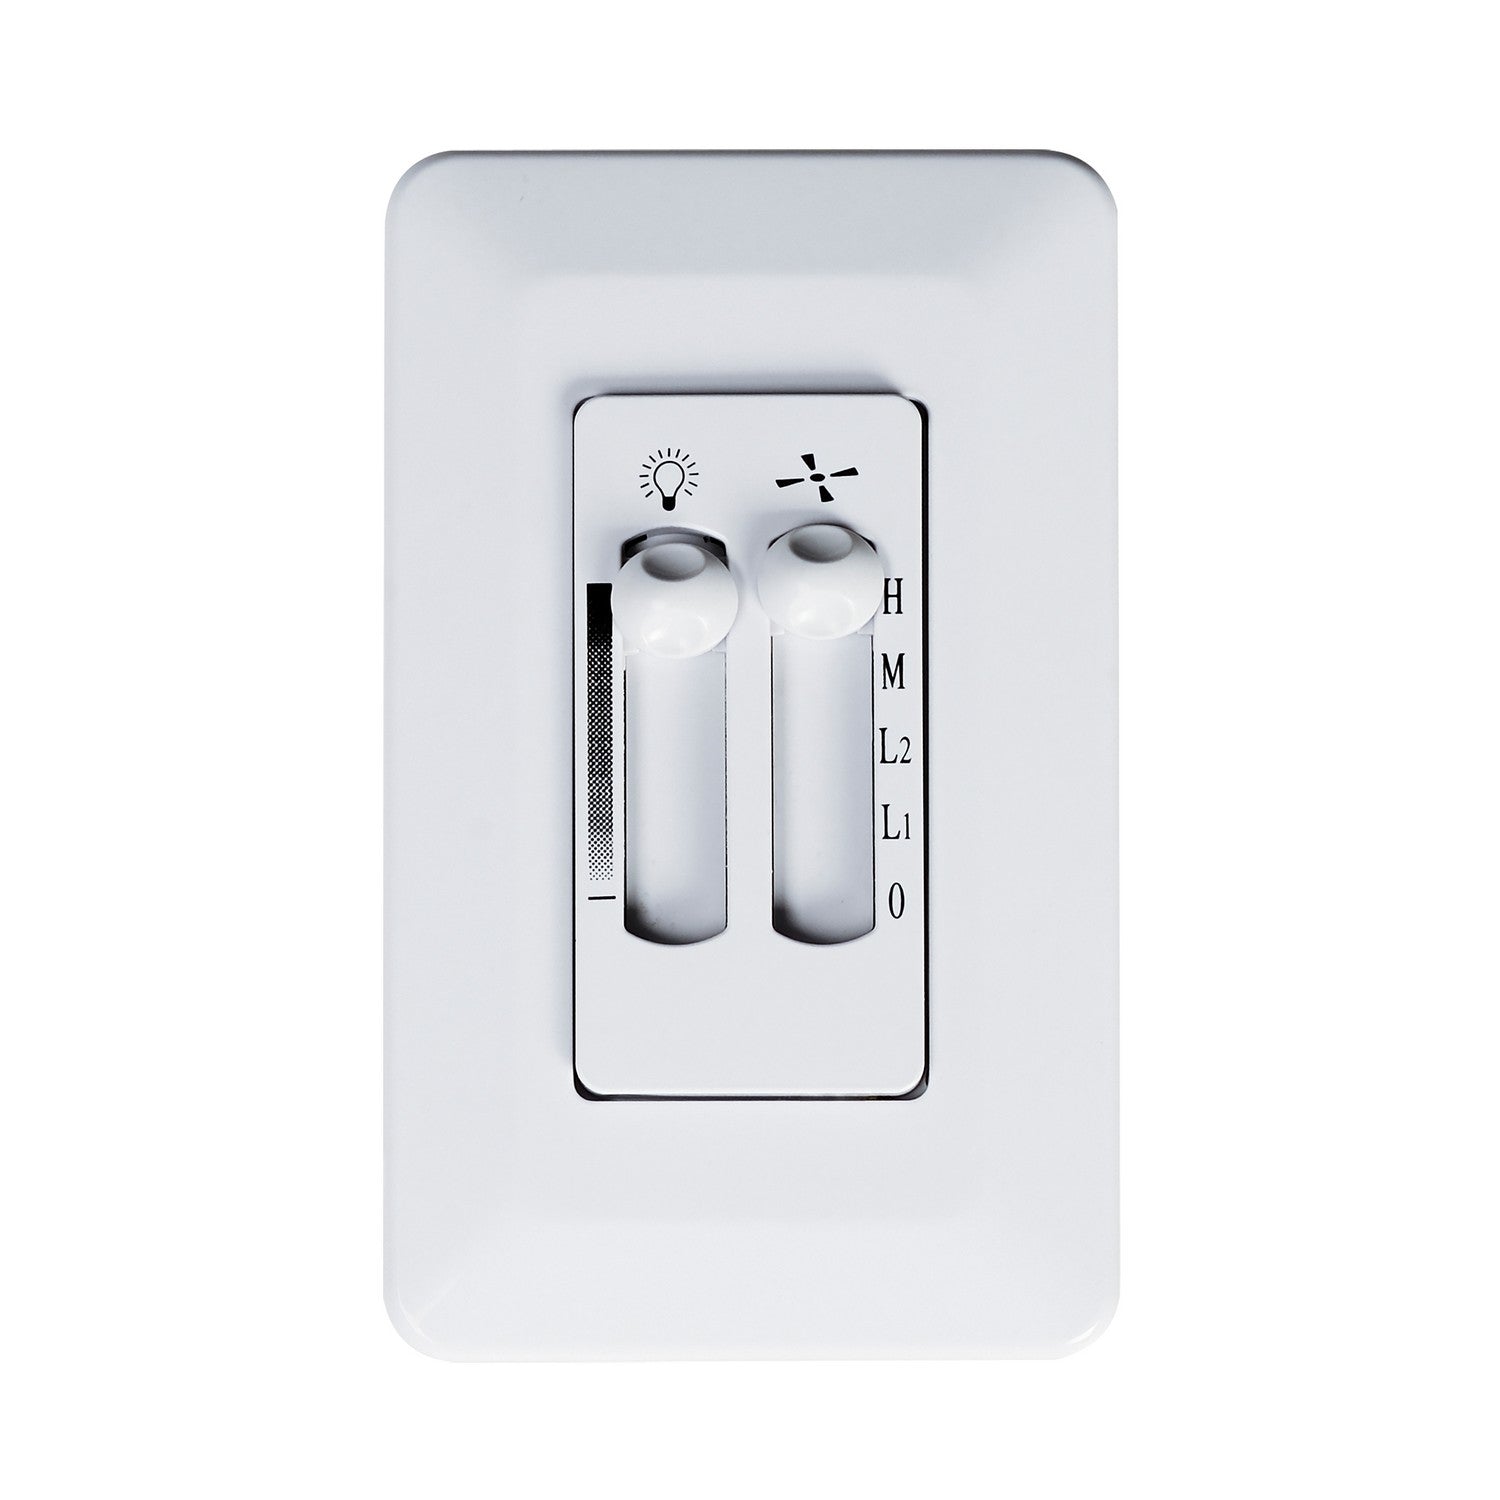 Maxim - Wall Control Light Dimming and Fan Control - Accessories - White- Union Lighting Luminaires Decor